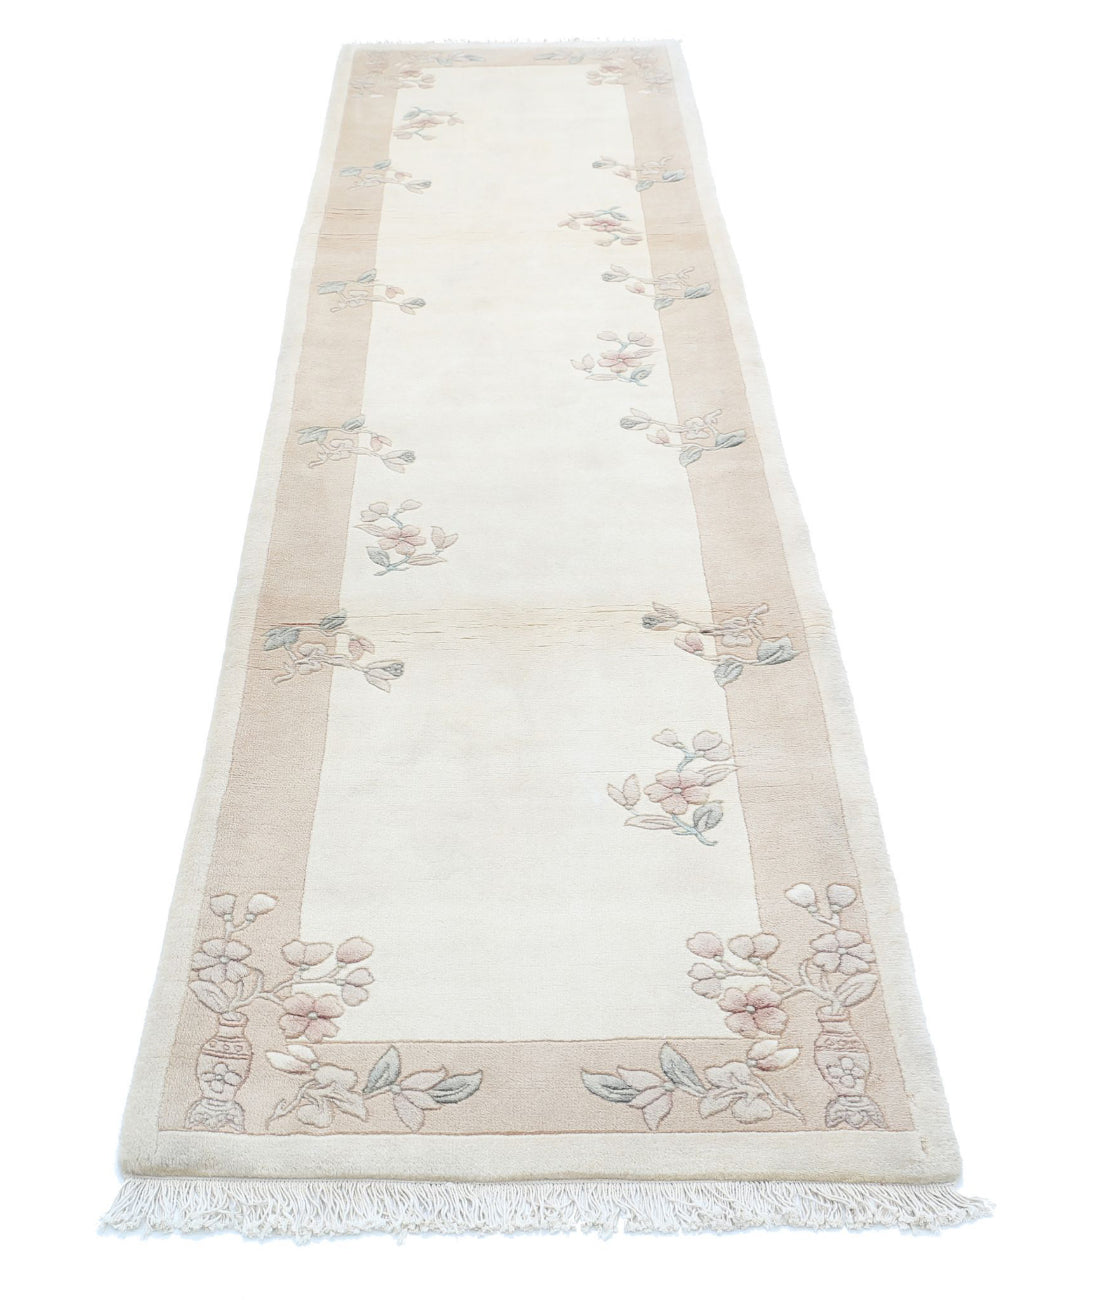 Chinese 2'6'' X 10'4'' Hand-Knotted Wool Rug 2'6'' x 10'4'' (75 X 310) / Ivory / Grey